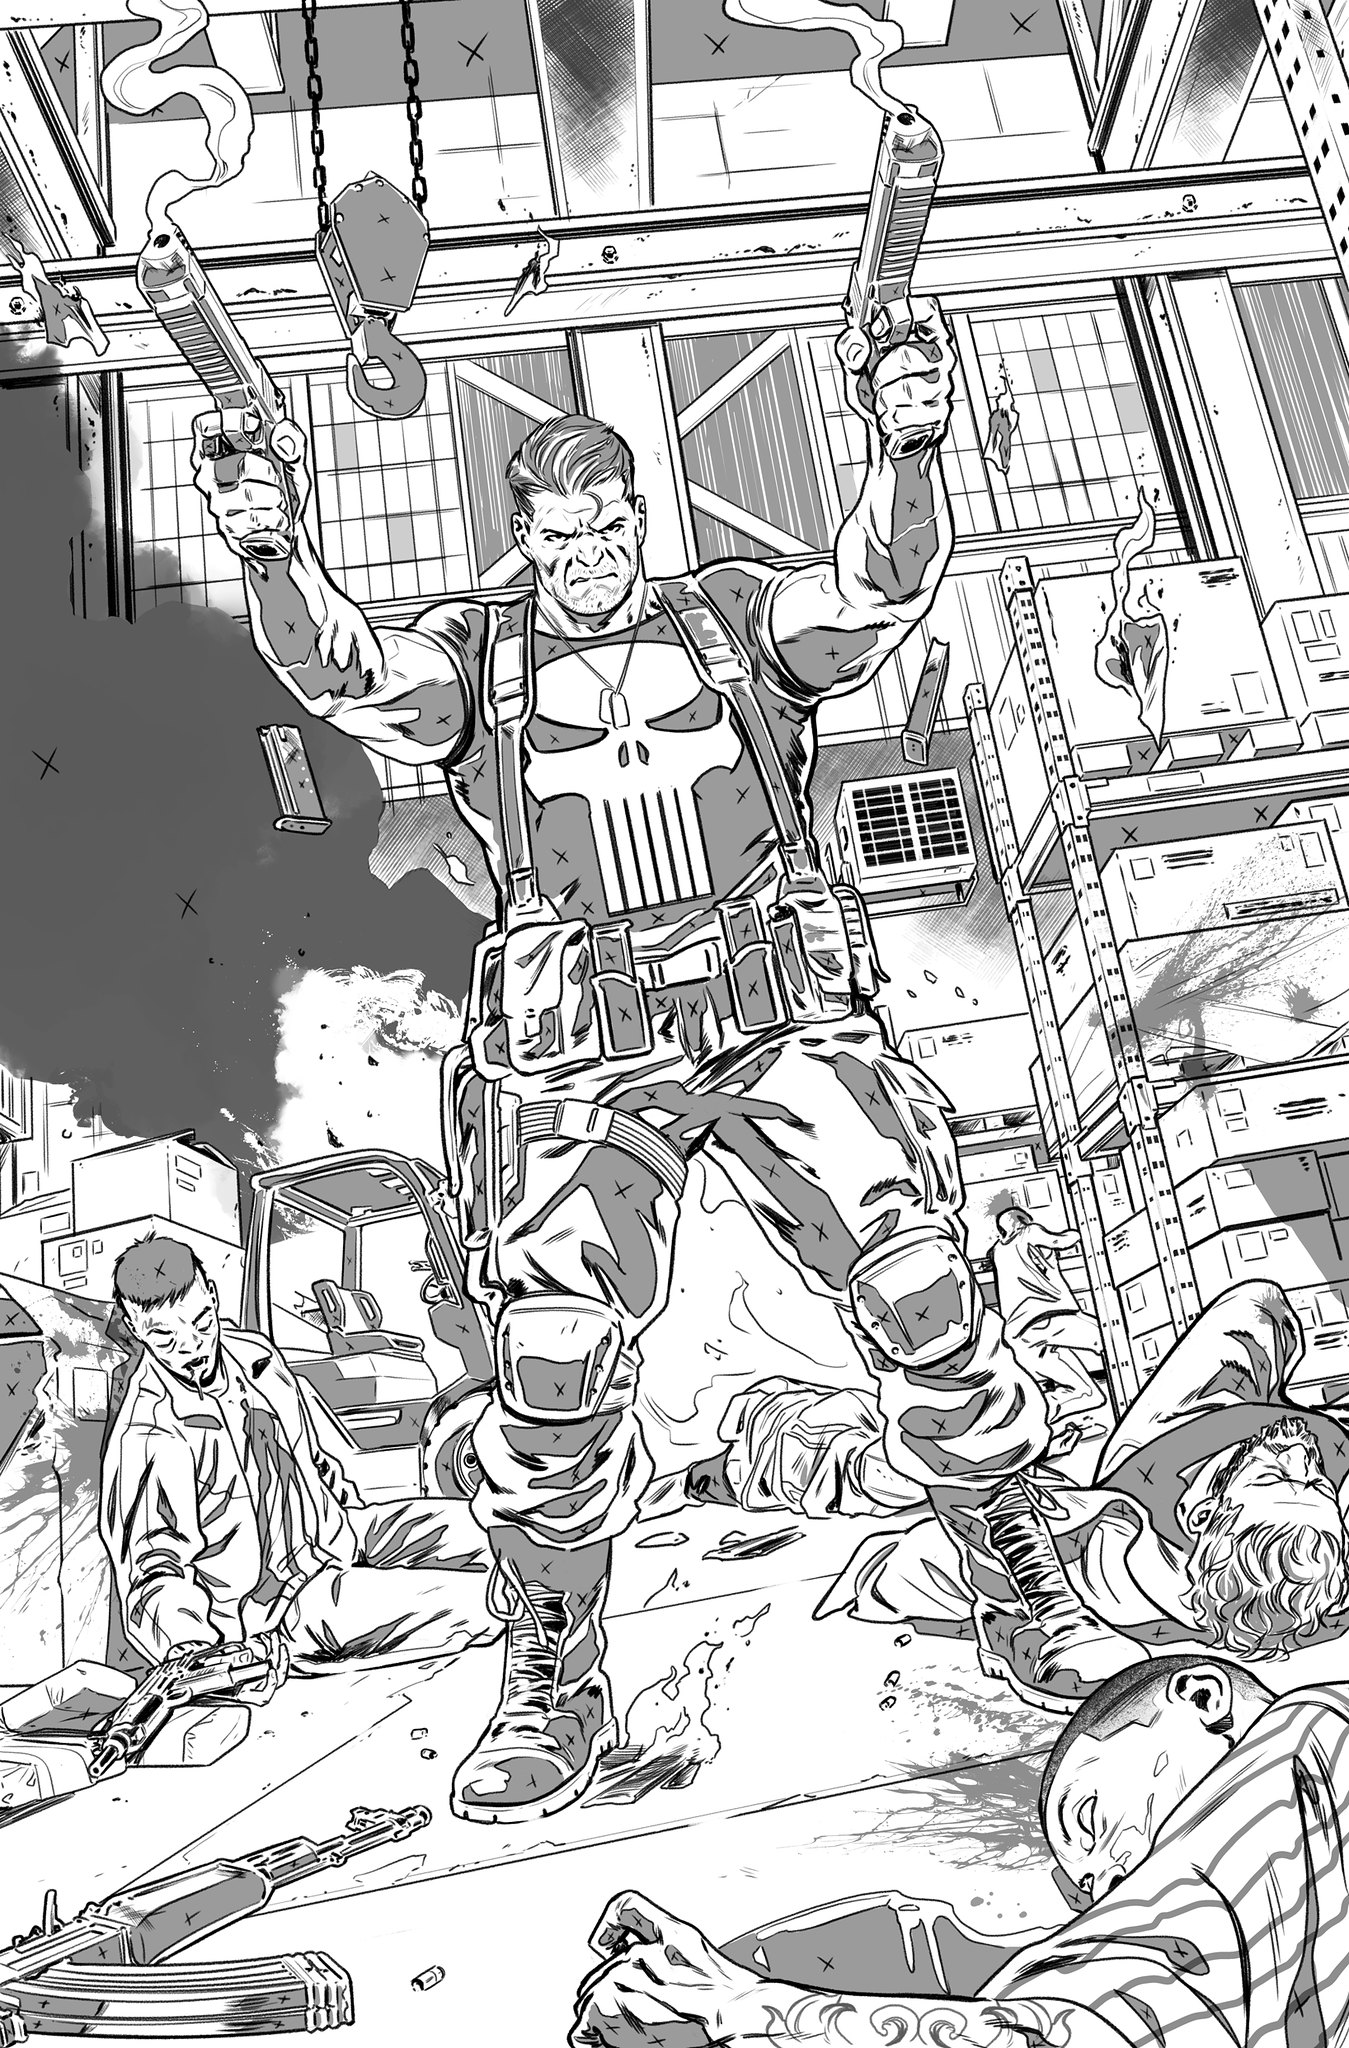 THEPUNISHER_PAGE3_PENCILS_FINAL